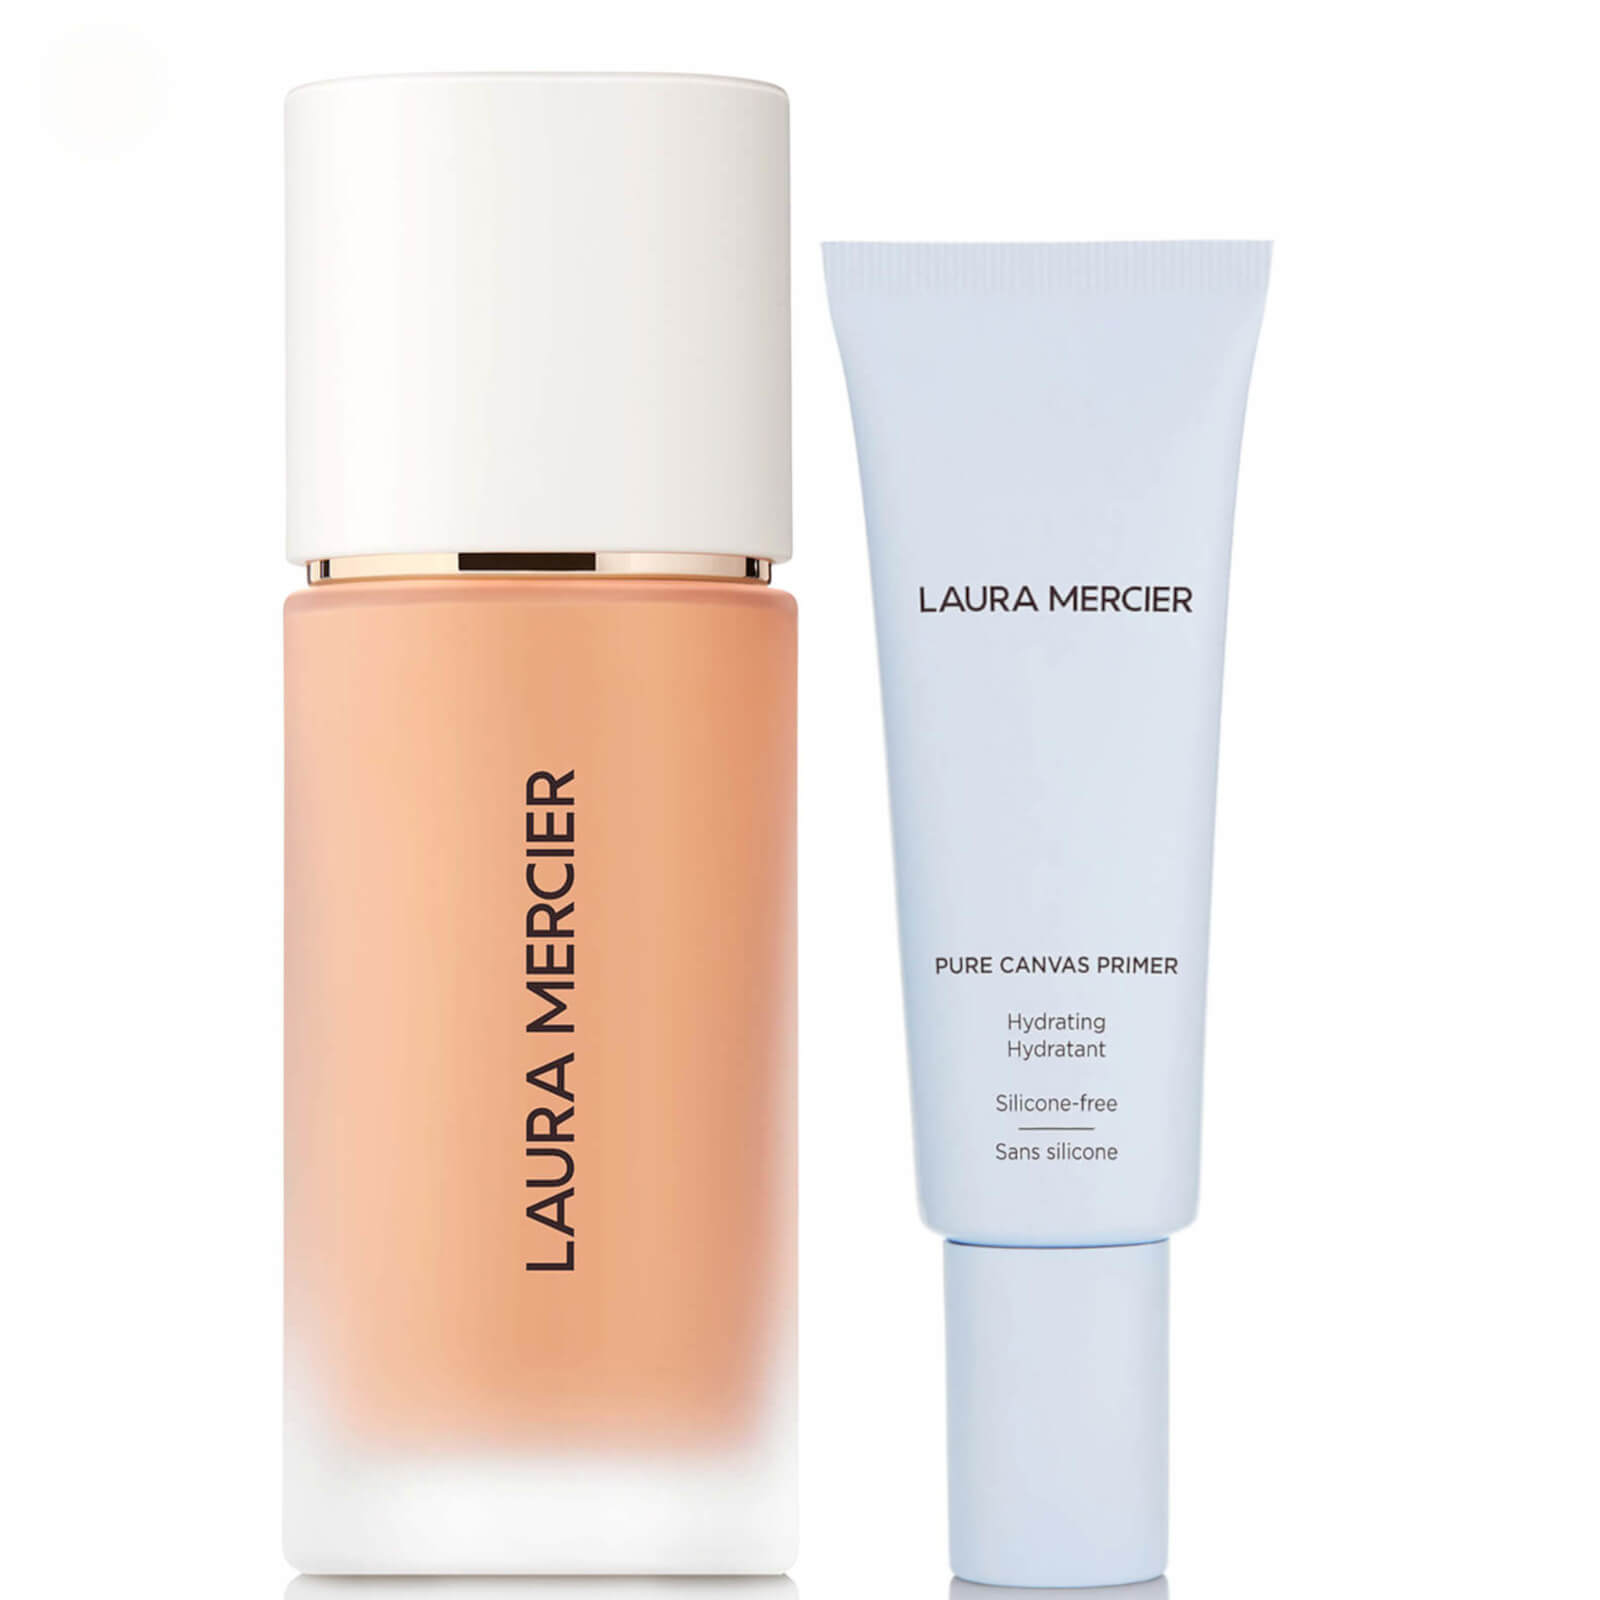 Laura Mercier Real Flawless Foundation and Pure Canvas Hydrating Primer Bundle (Various Shades) - 3C1 Dune